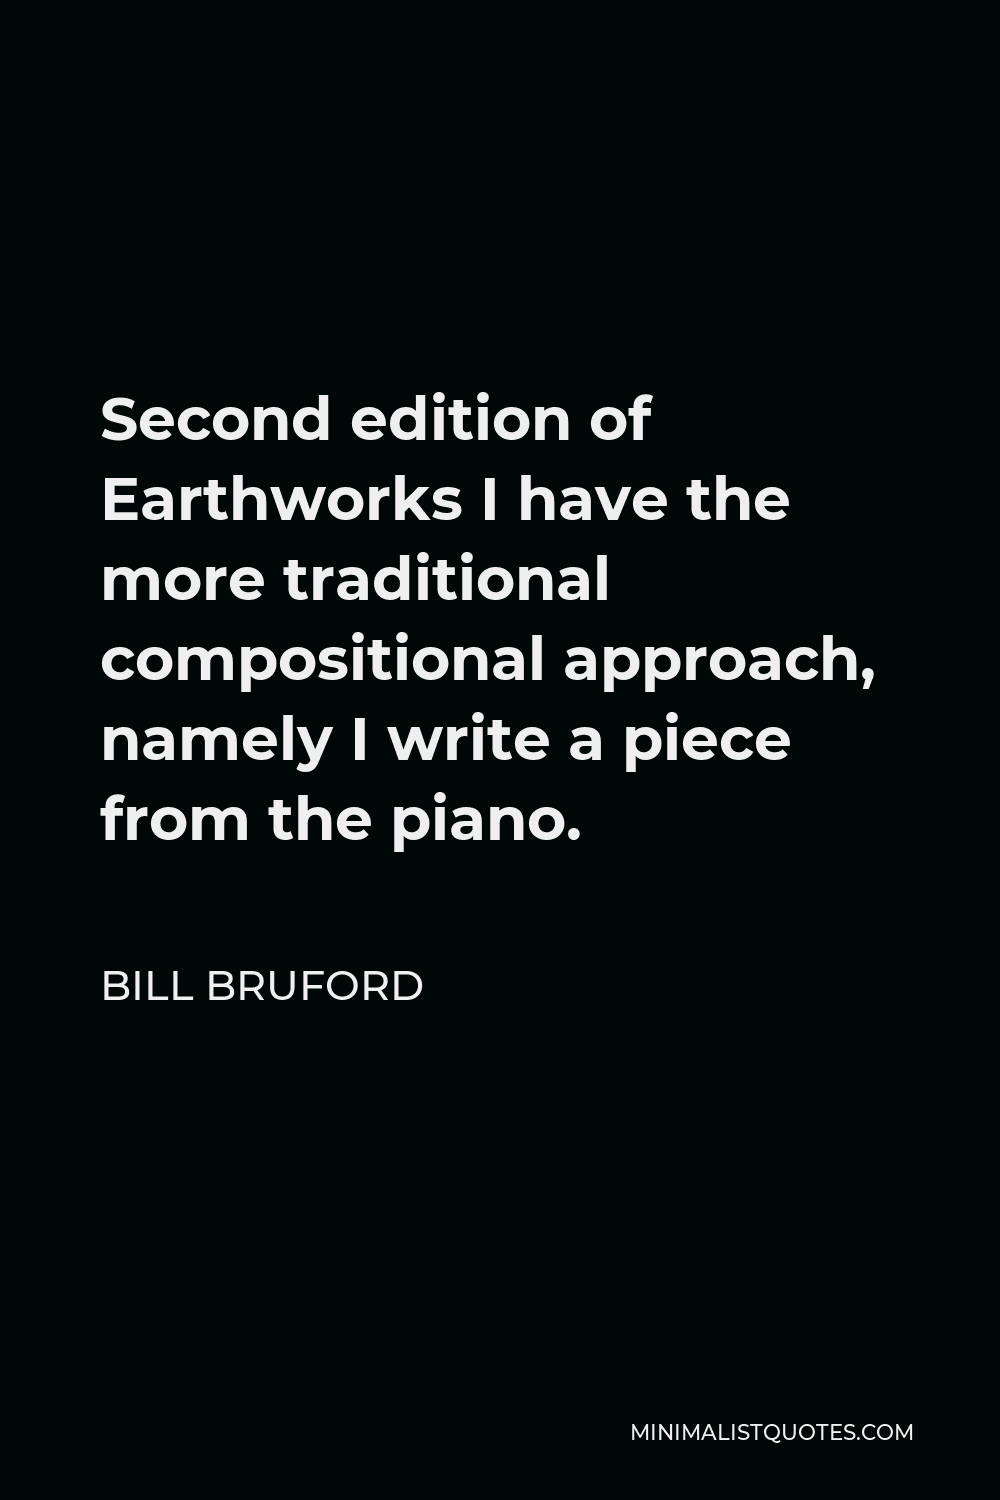 Bill Bruford Quote - Second edition of Earthworks I have the more traditional compositional approach, namely I write a piece from the piano.